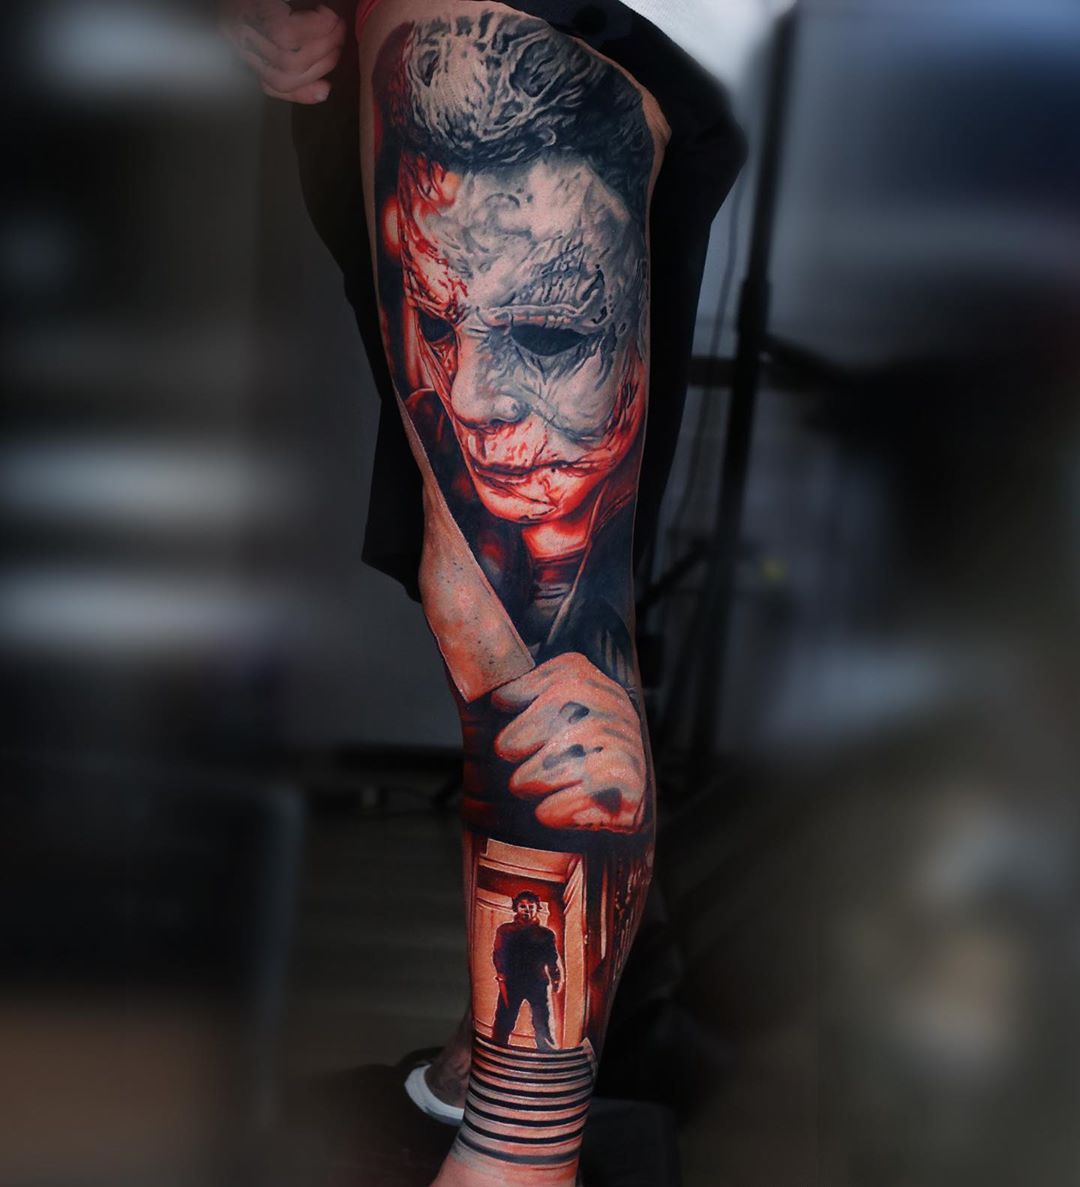 Details 73 michael myers tattoo drawing best  thtantai2